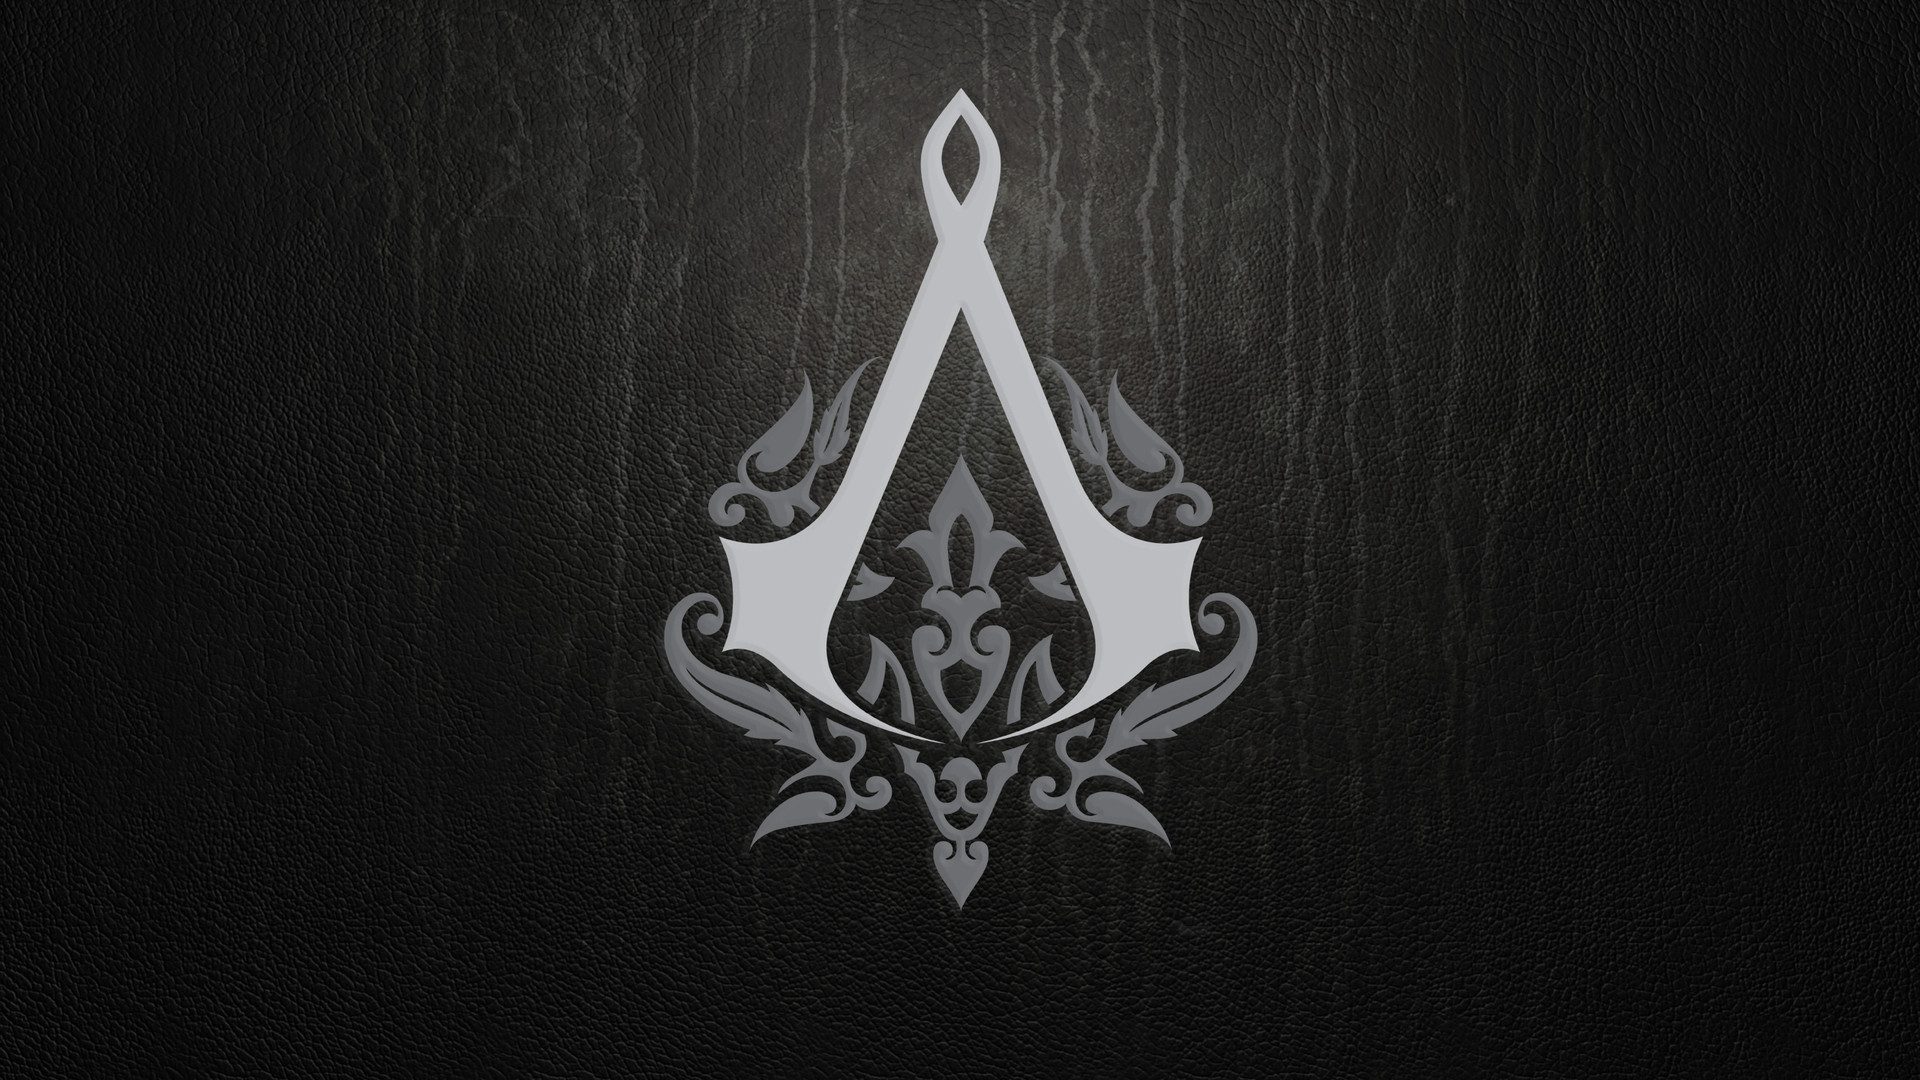 wallpaper by assassins the assassin s creed wiki assassins creed .